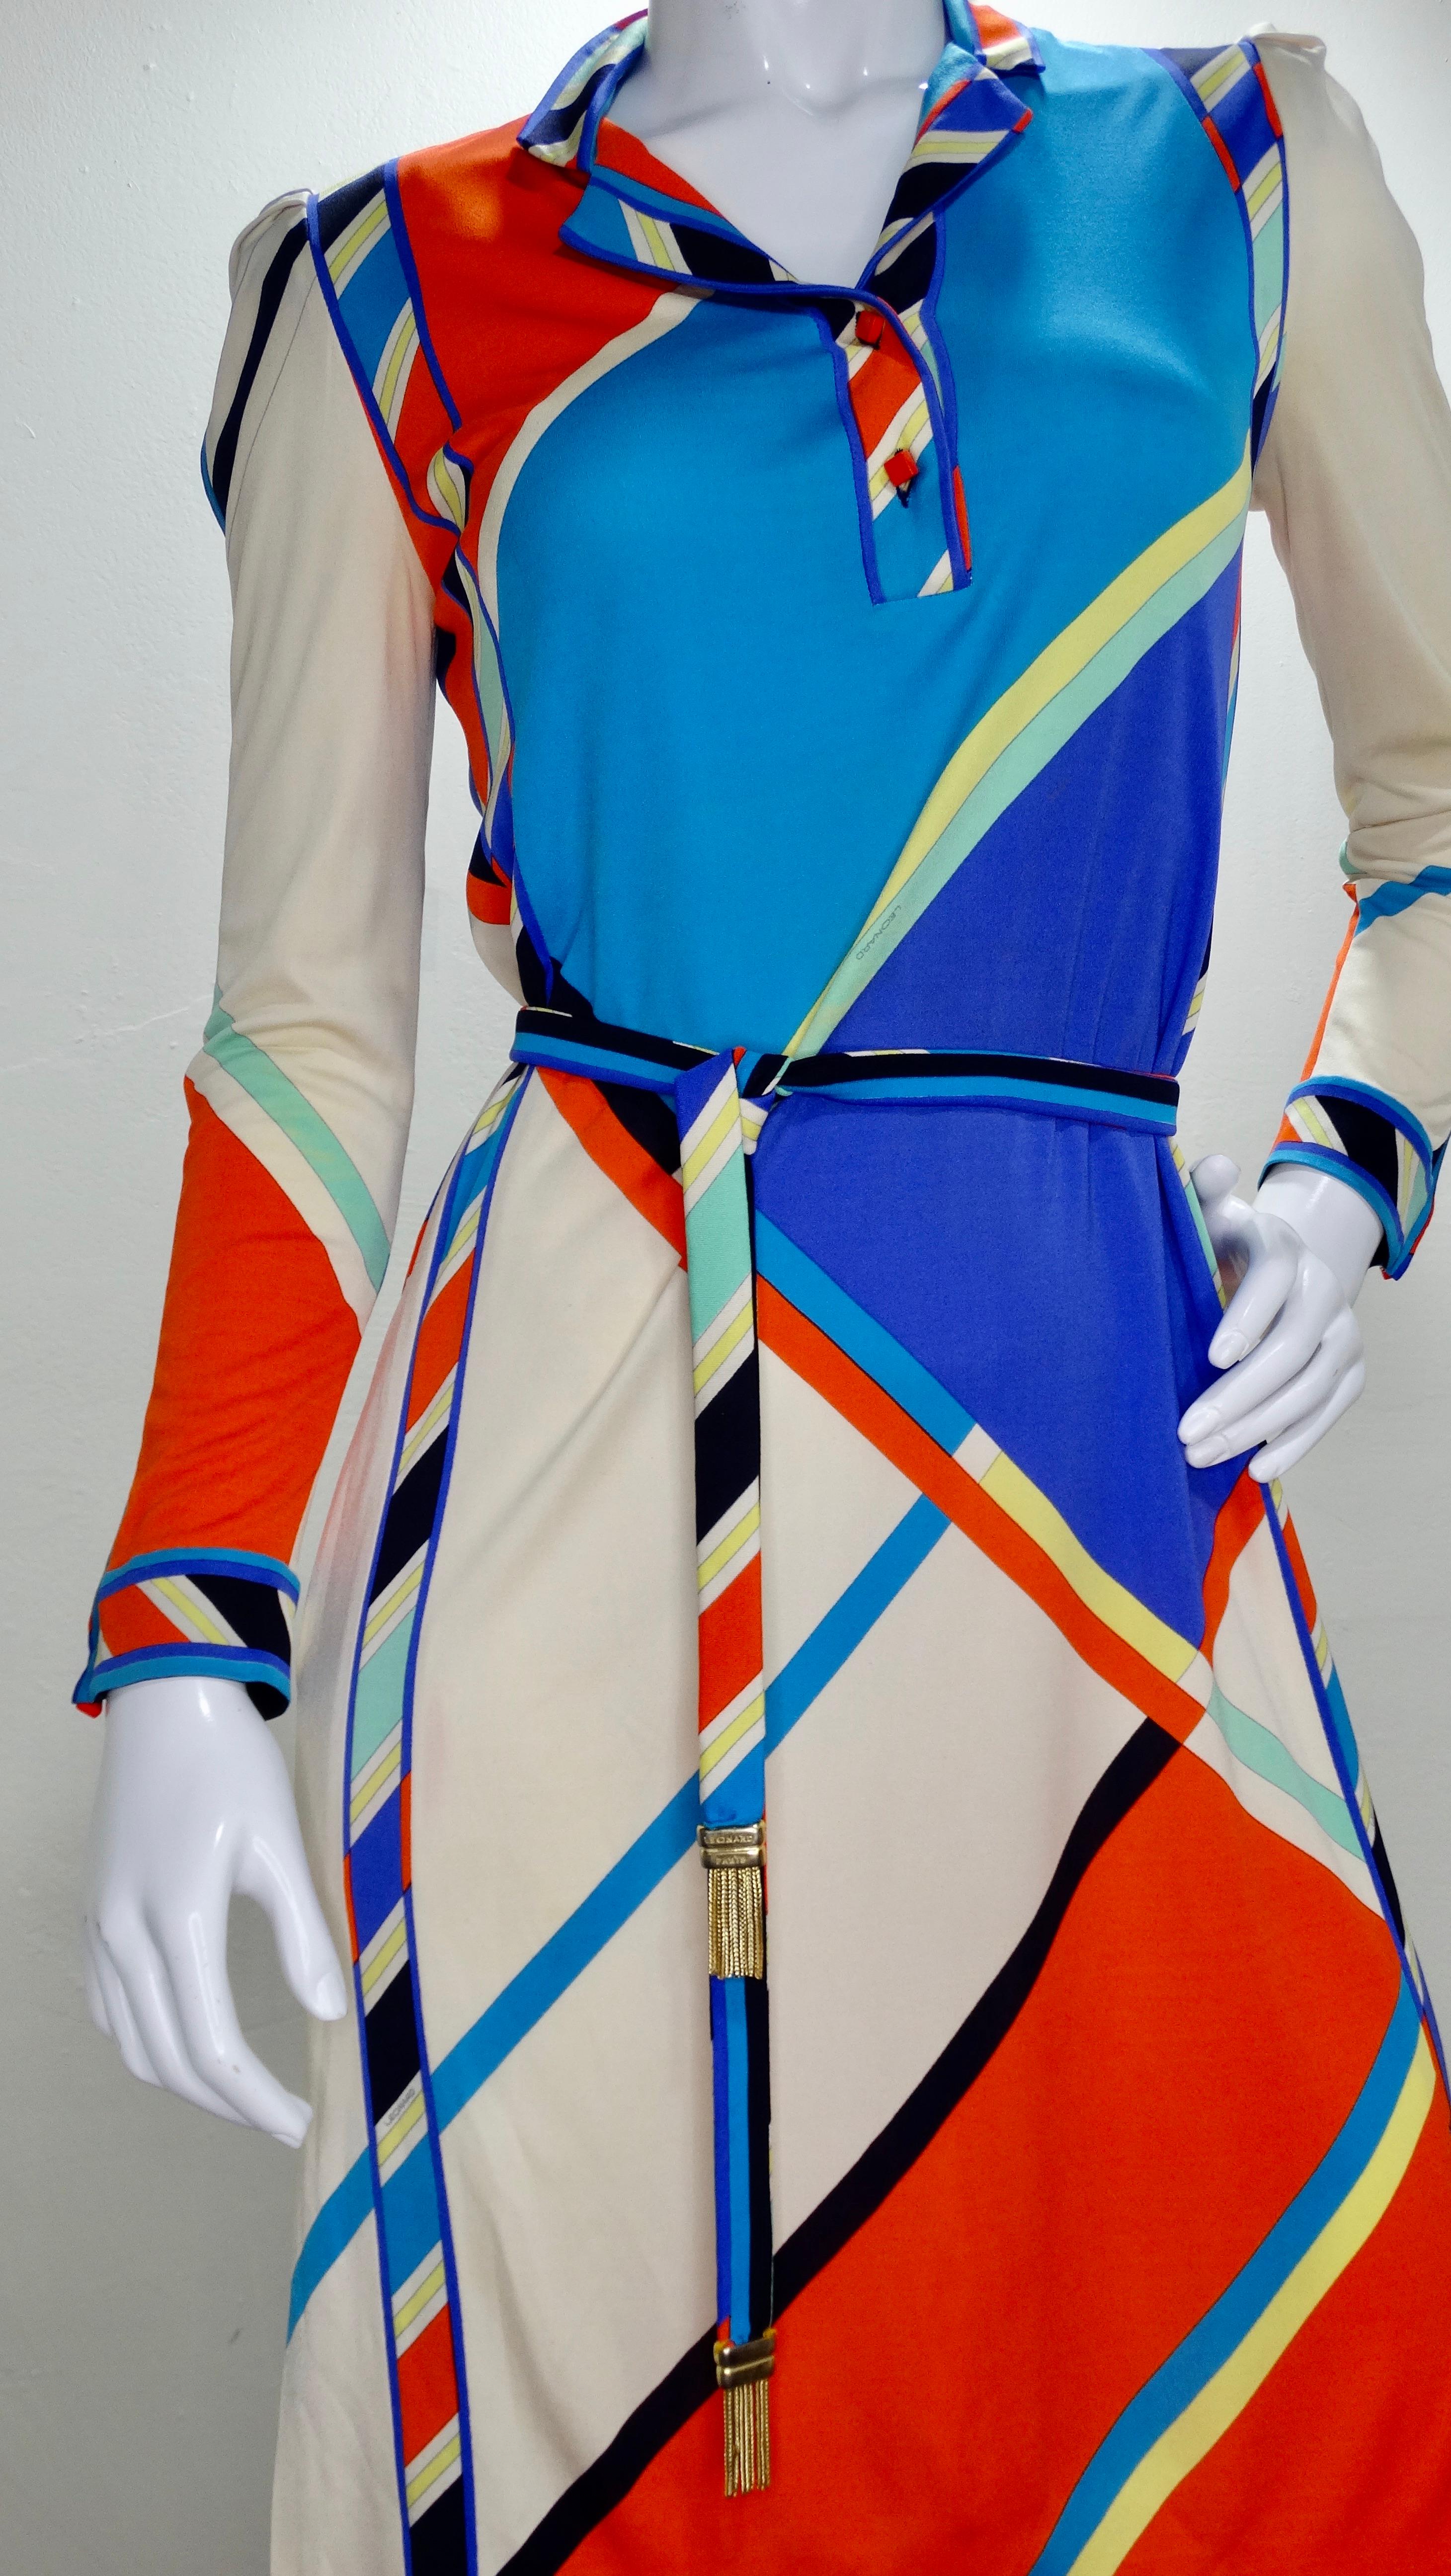 A beautiful 1970s Leonard Paris dress with some Pucci inspiration! Made from soft Silk Jersey, this dress features a multi-colored geometric print with a tassel belt and orange square buttons at the collar and cuffs. Inseam pockets and one small